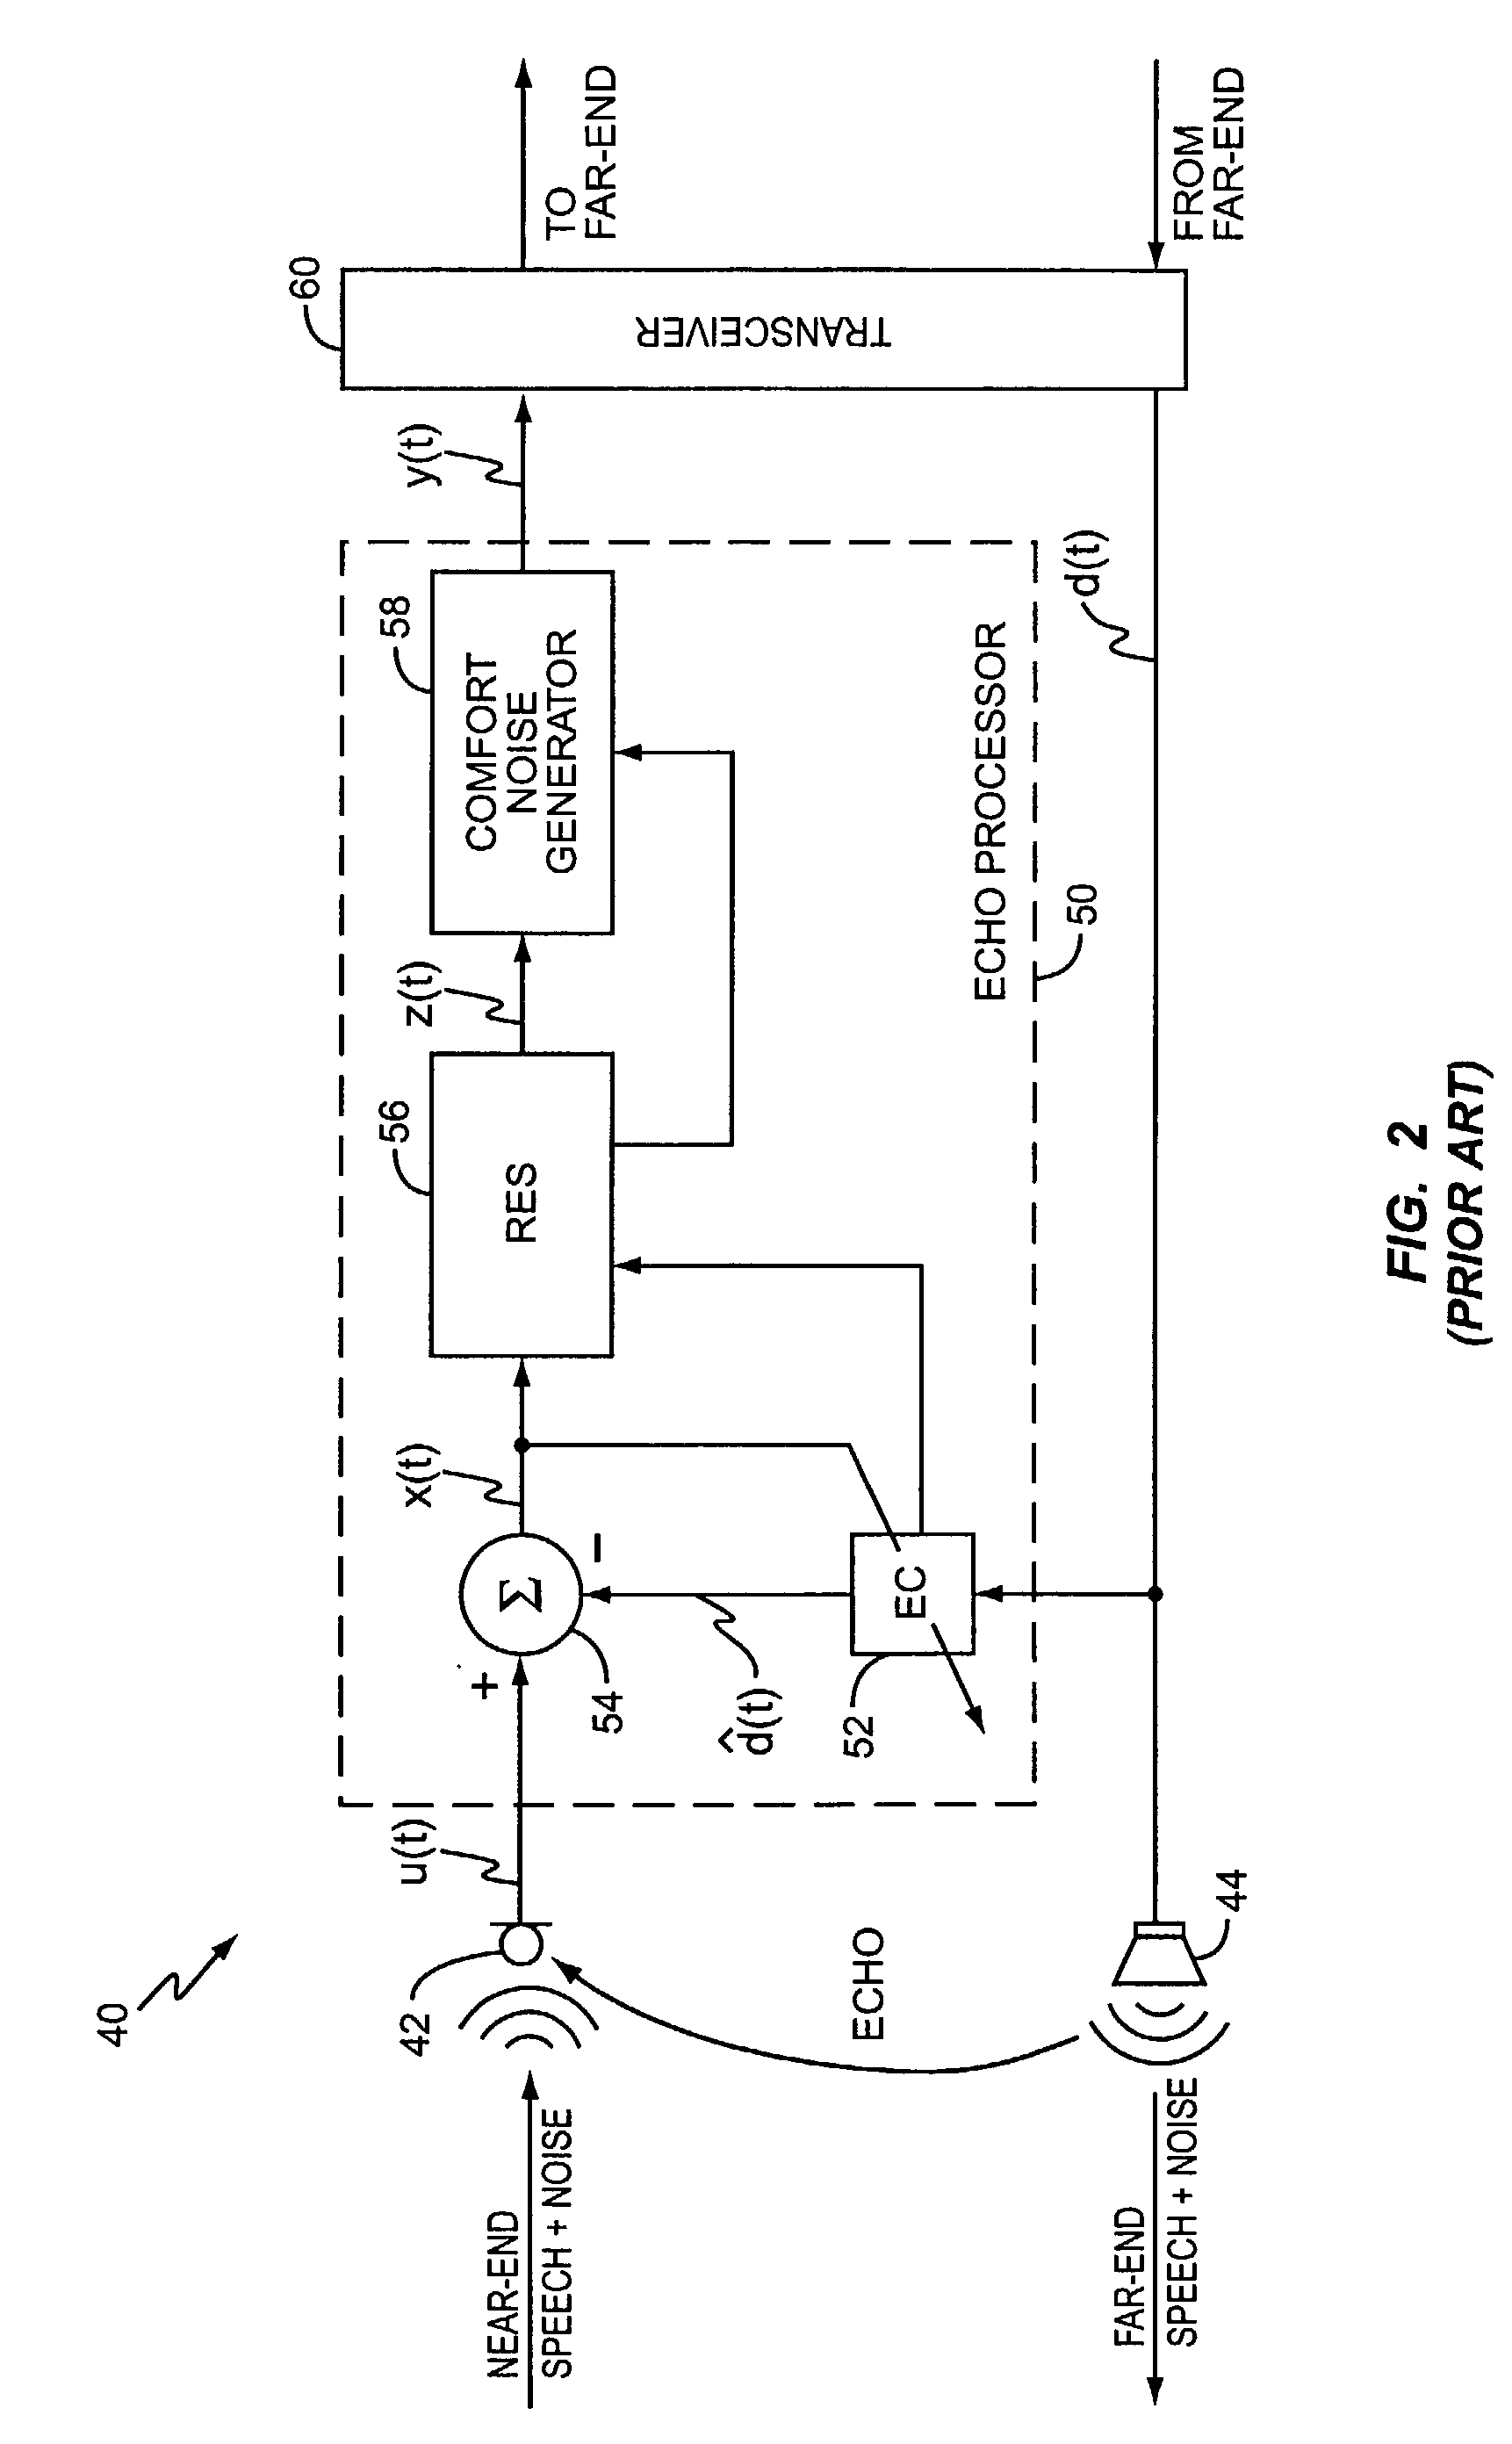 Integrated noise cancellation and residual echo suppression